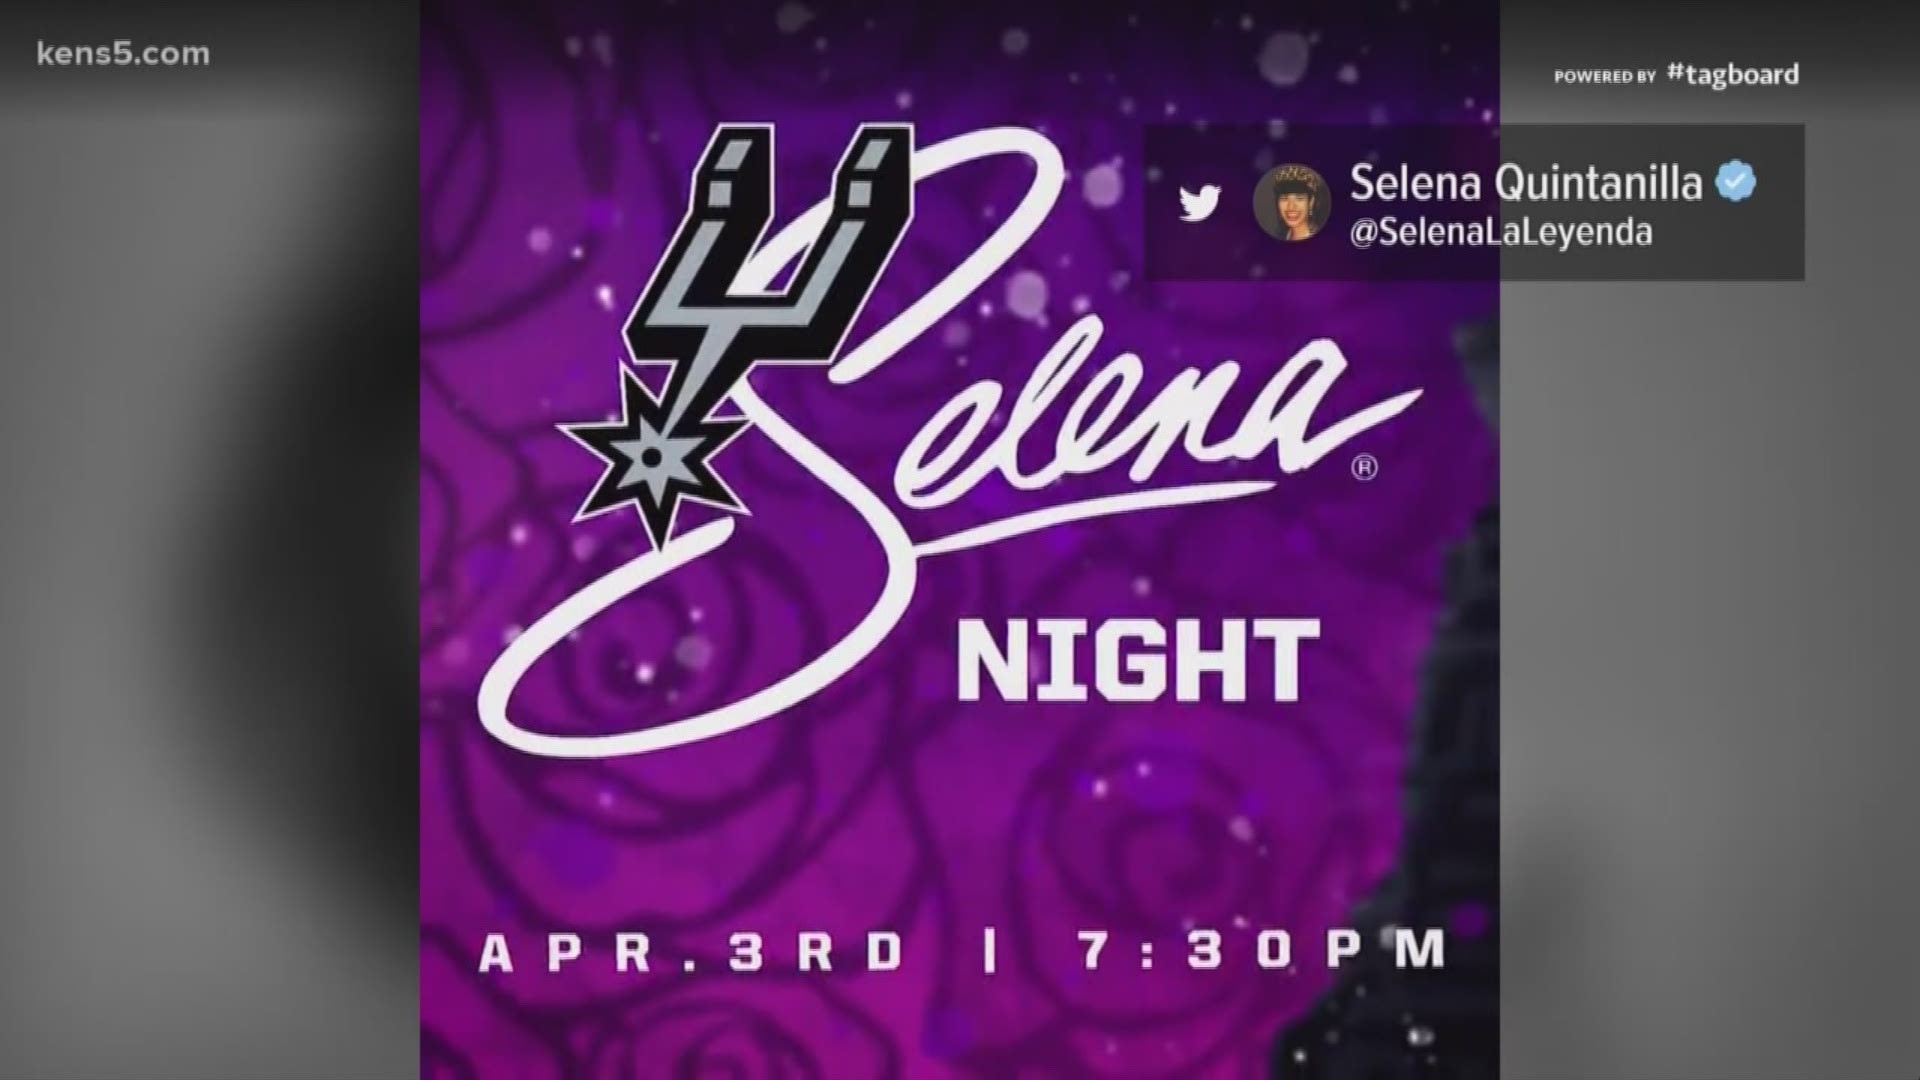 A first for the Spurs; the Silver and Black will be hosting a Selena Night.